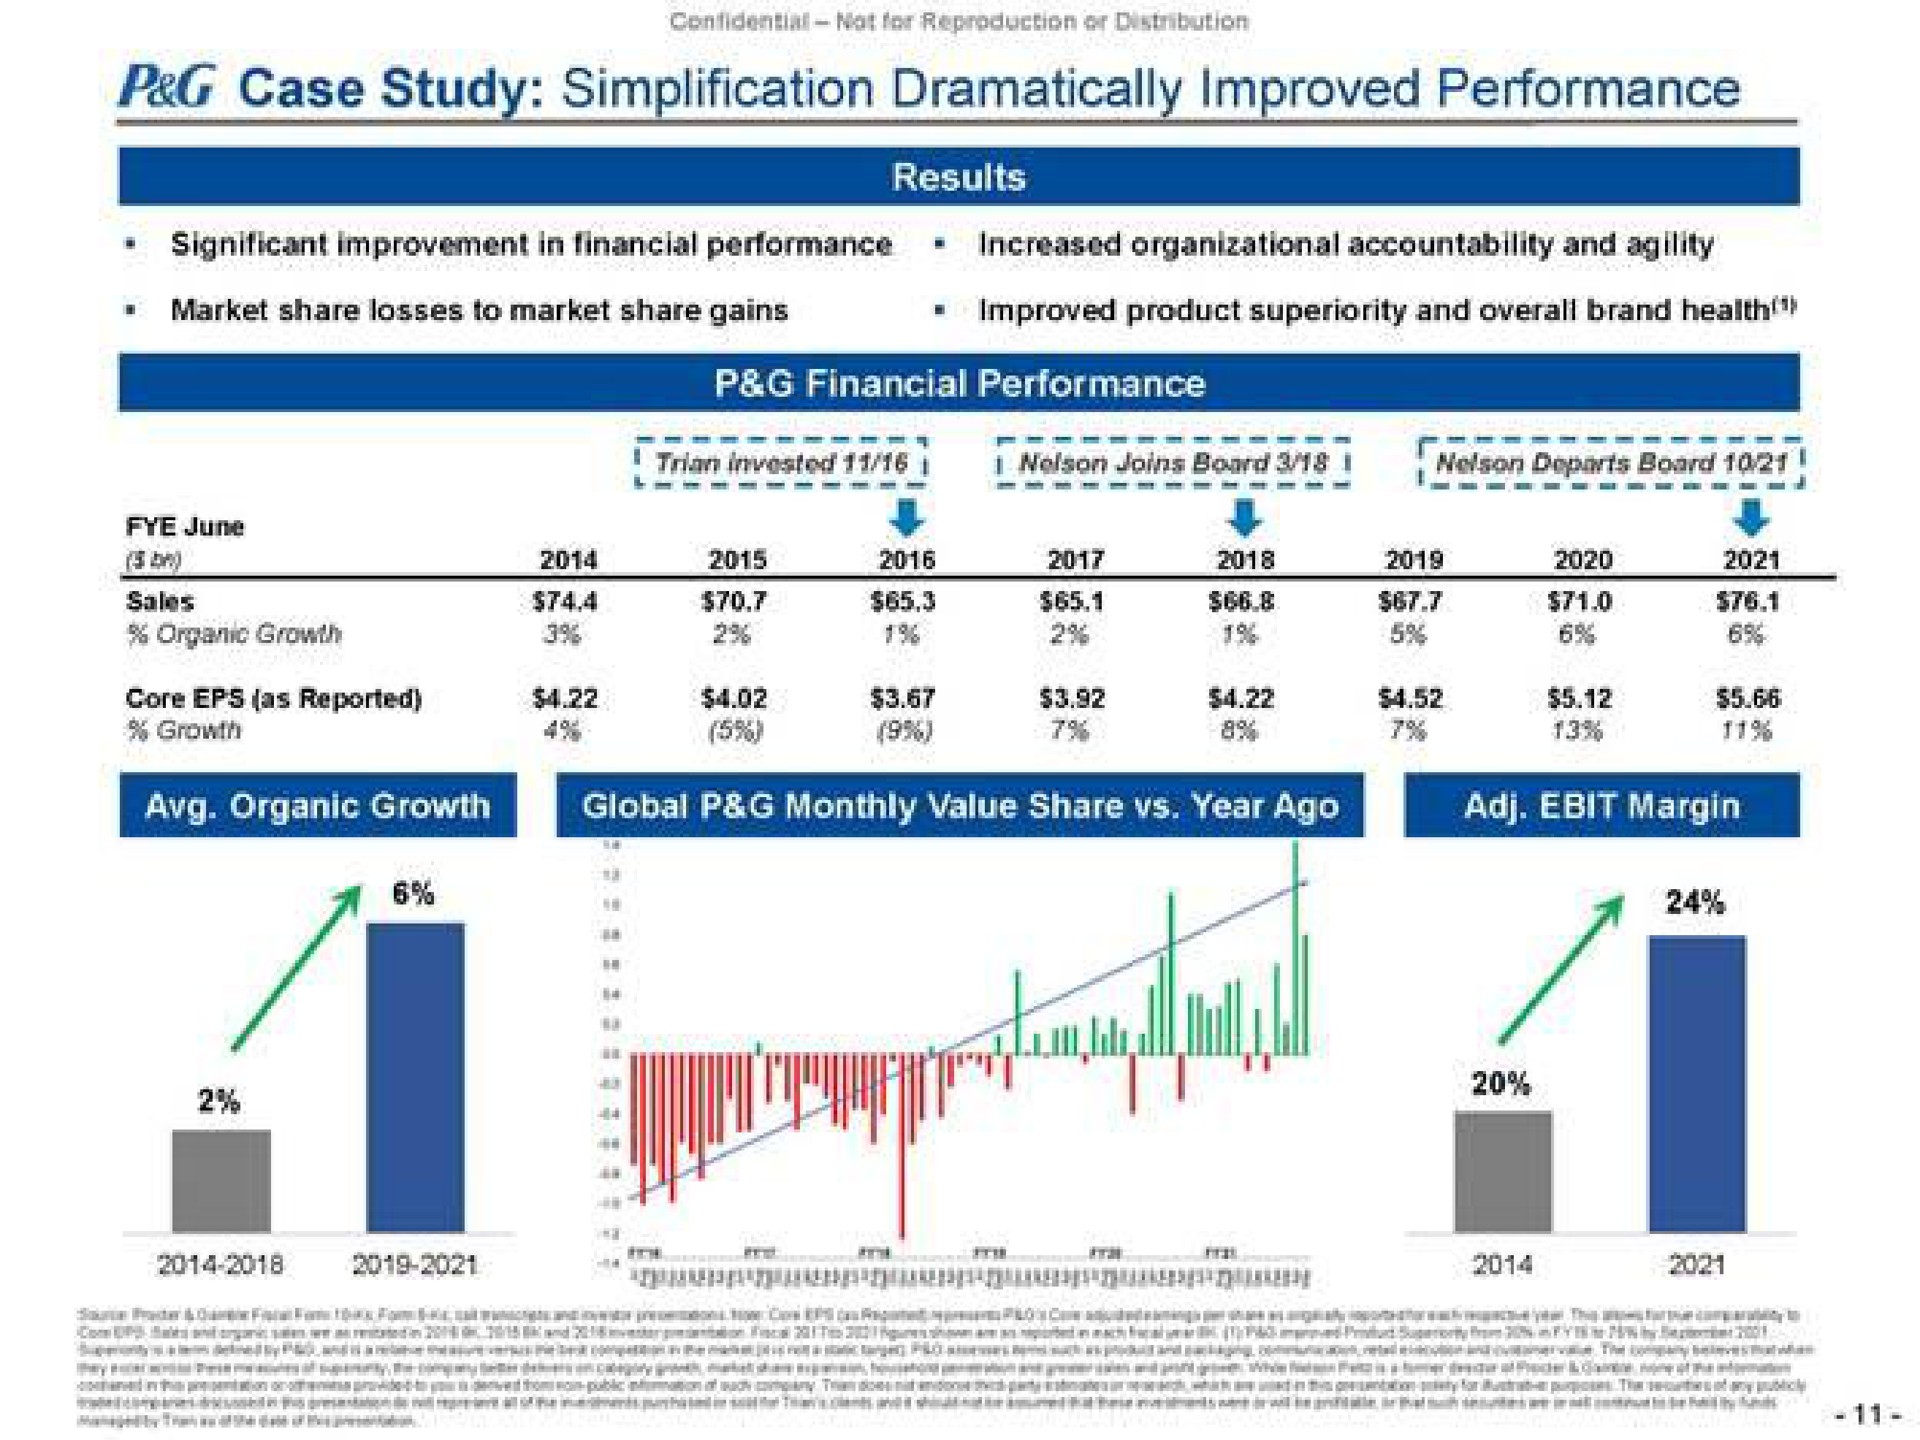 peg case study simplification dramatically improved performance or | Trian Partners